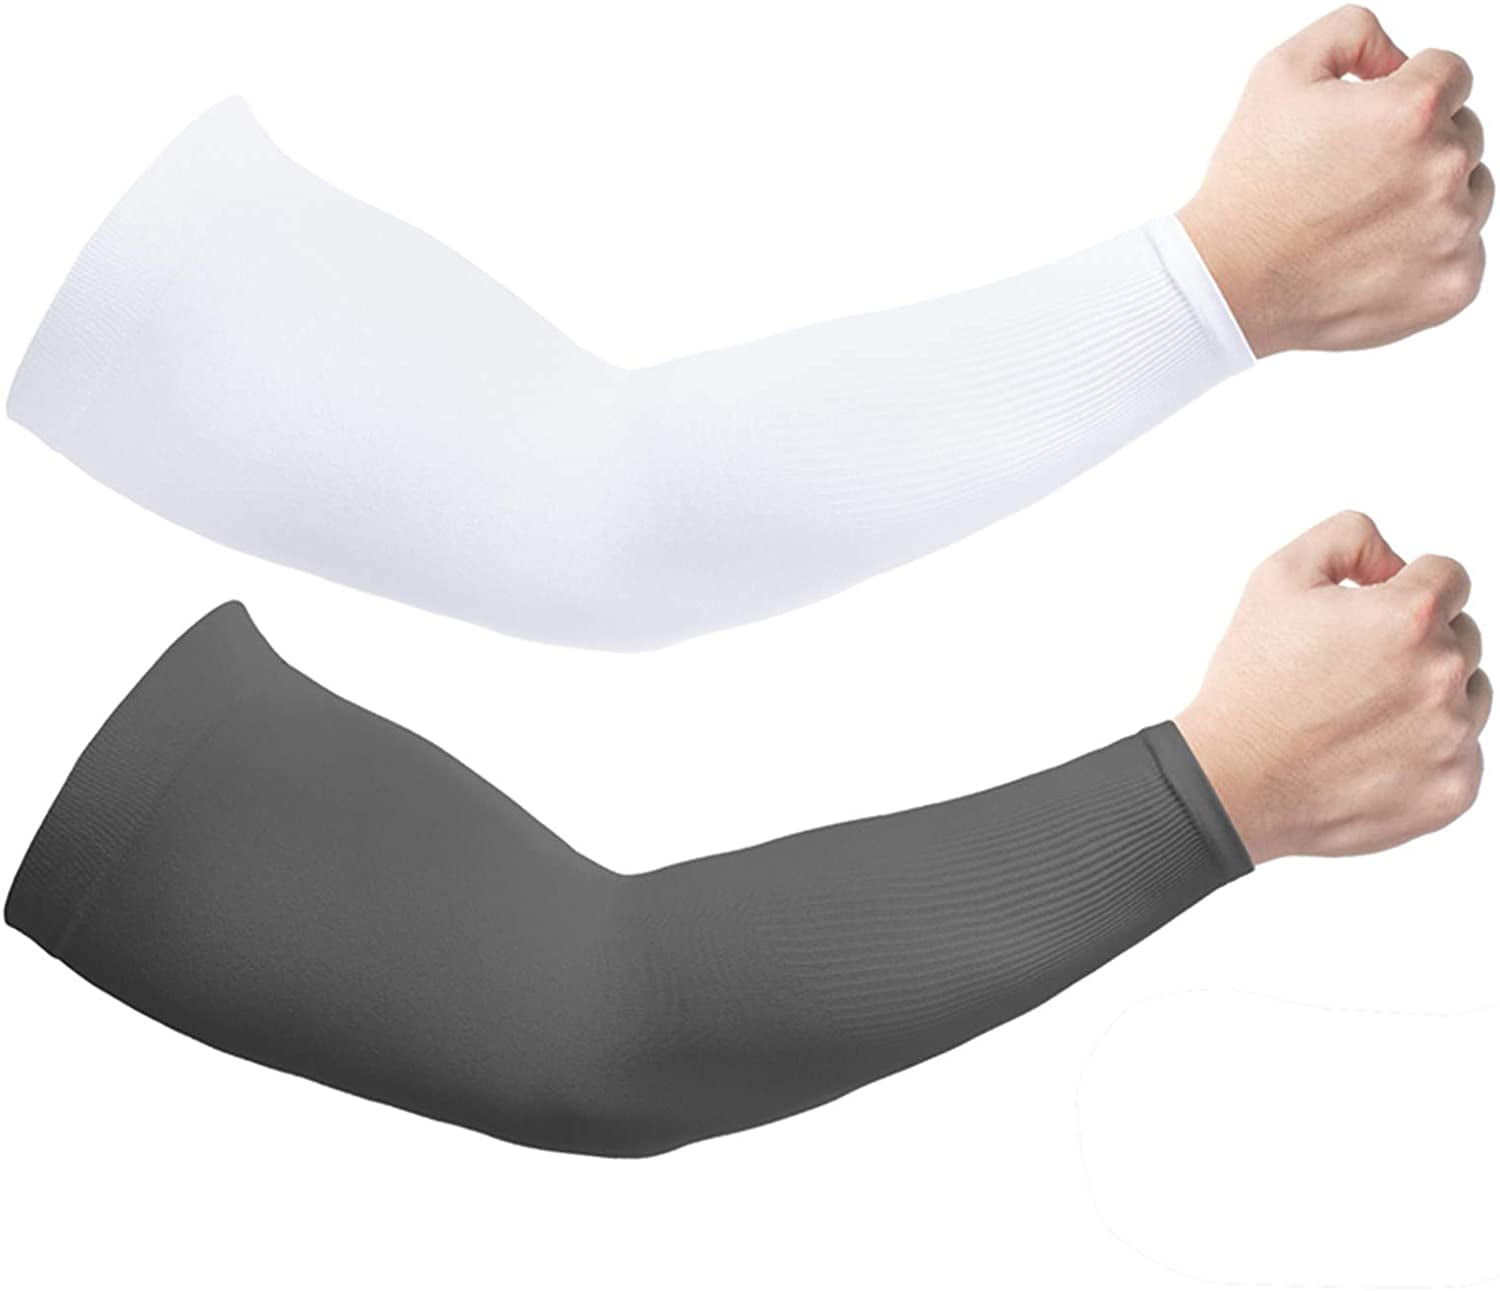 2 Pairs UV Protection Cooling Arm Sleeves UPF 50 Sun Sleeves for Men Women Youth 